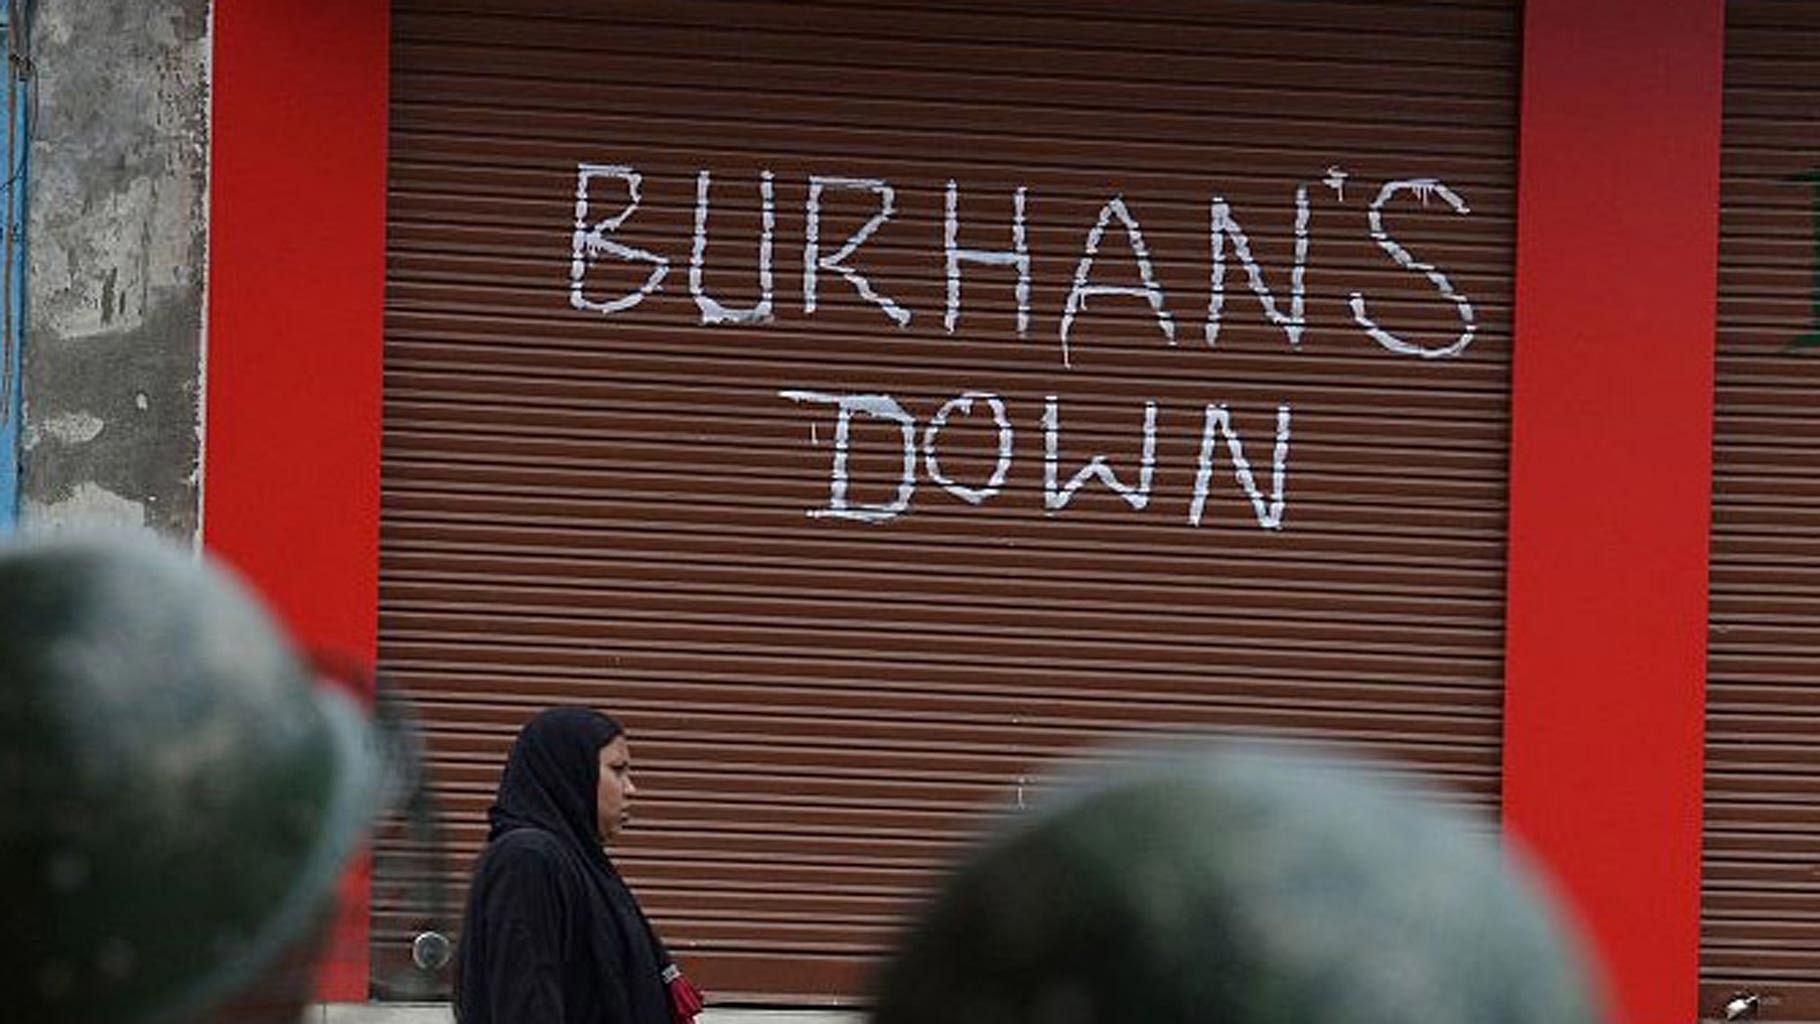 The idea of graffiti protests have lately triggered a new cat-and-mouse situation in equally beleaguered Kashmir. (Photo Courtesy: Nisar Dharma)